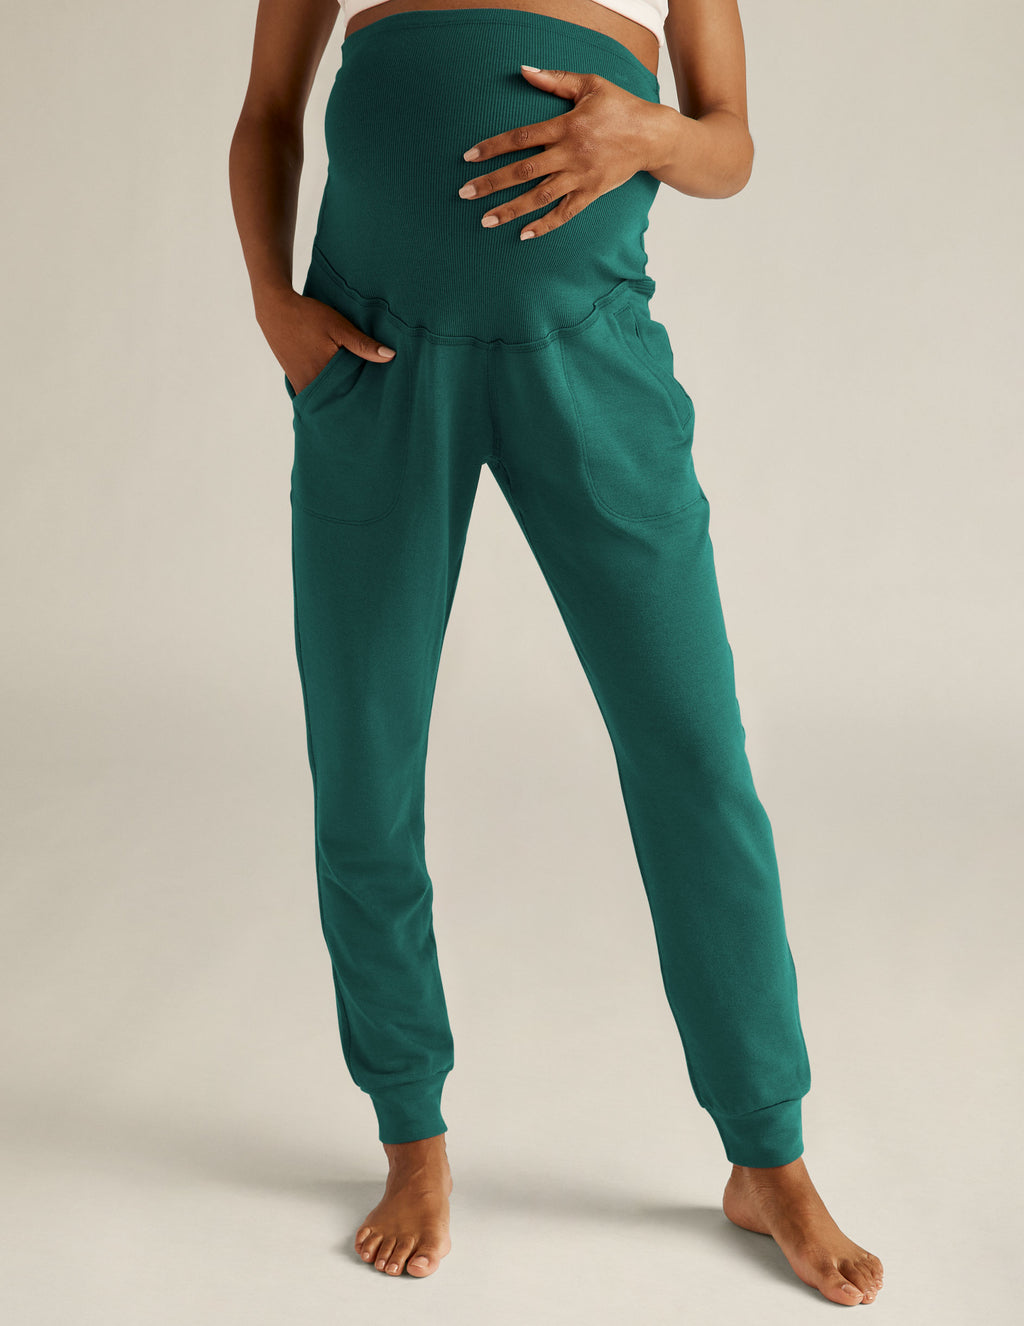 Cozy Fleece Grow Together Fold Over Maternity Sweatpants Secondary Image